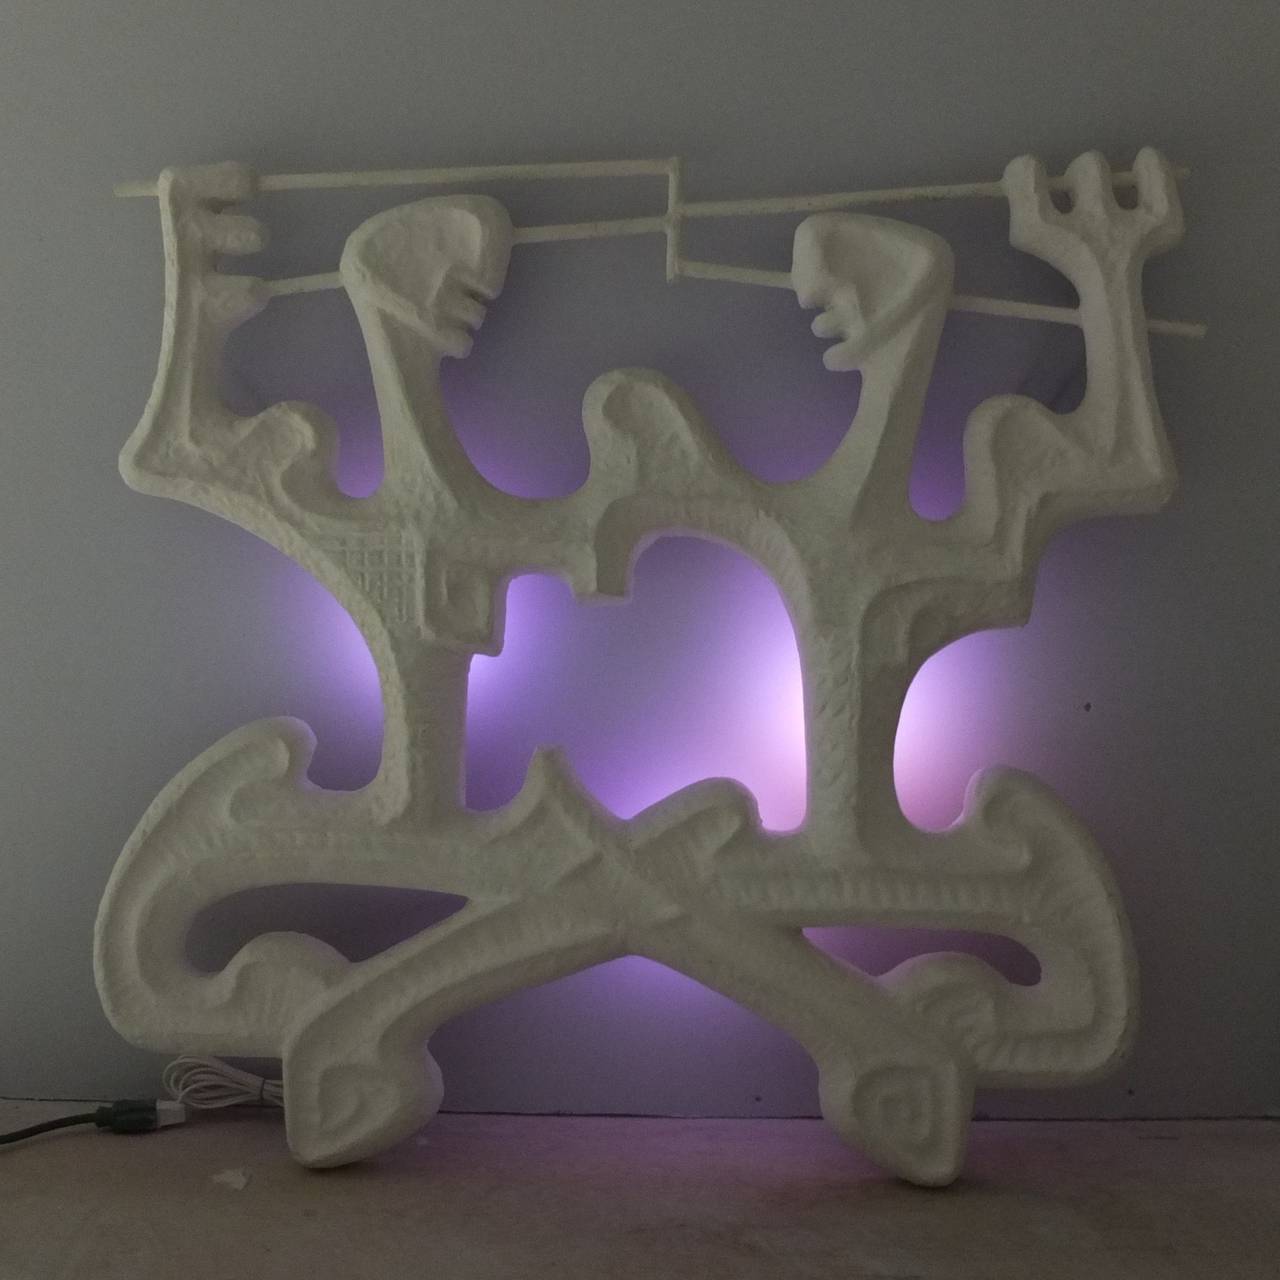 American Rare Backlit Gemini Wall Sculpture by Frederic Weinberg